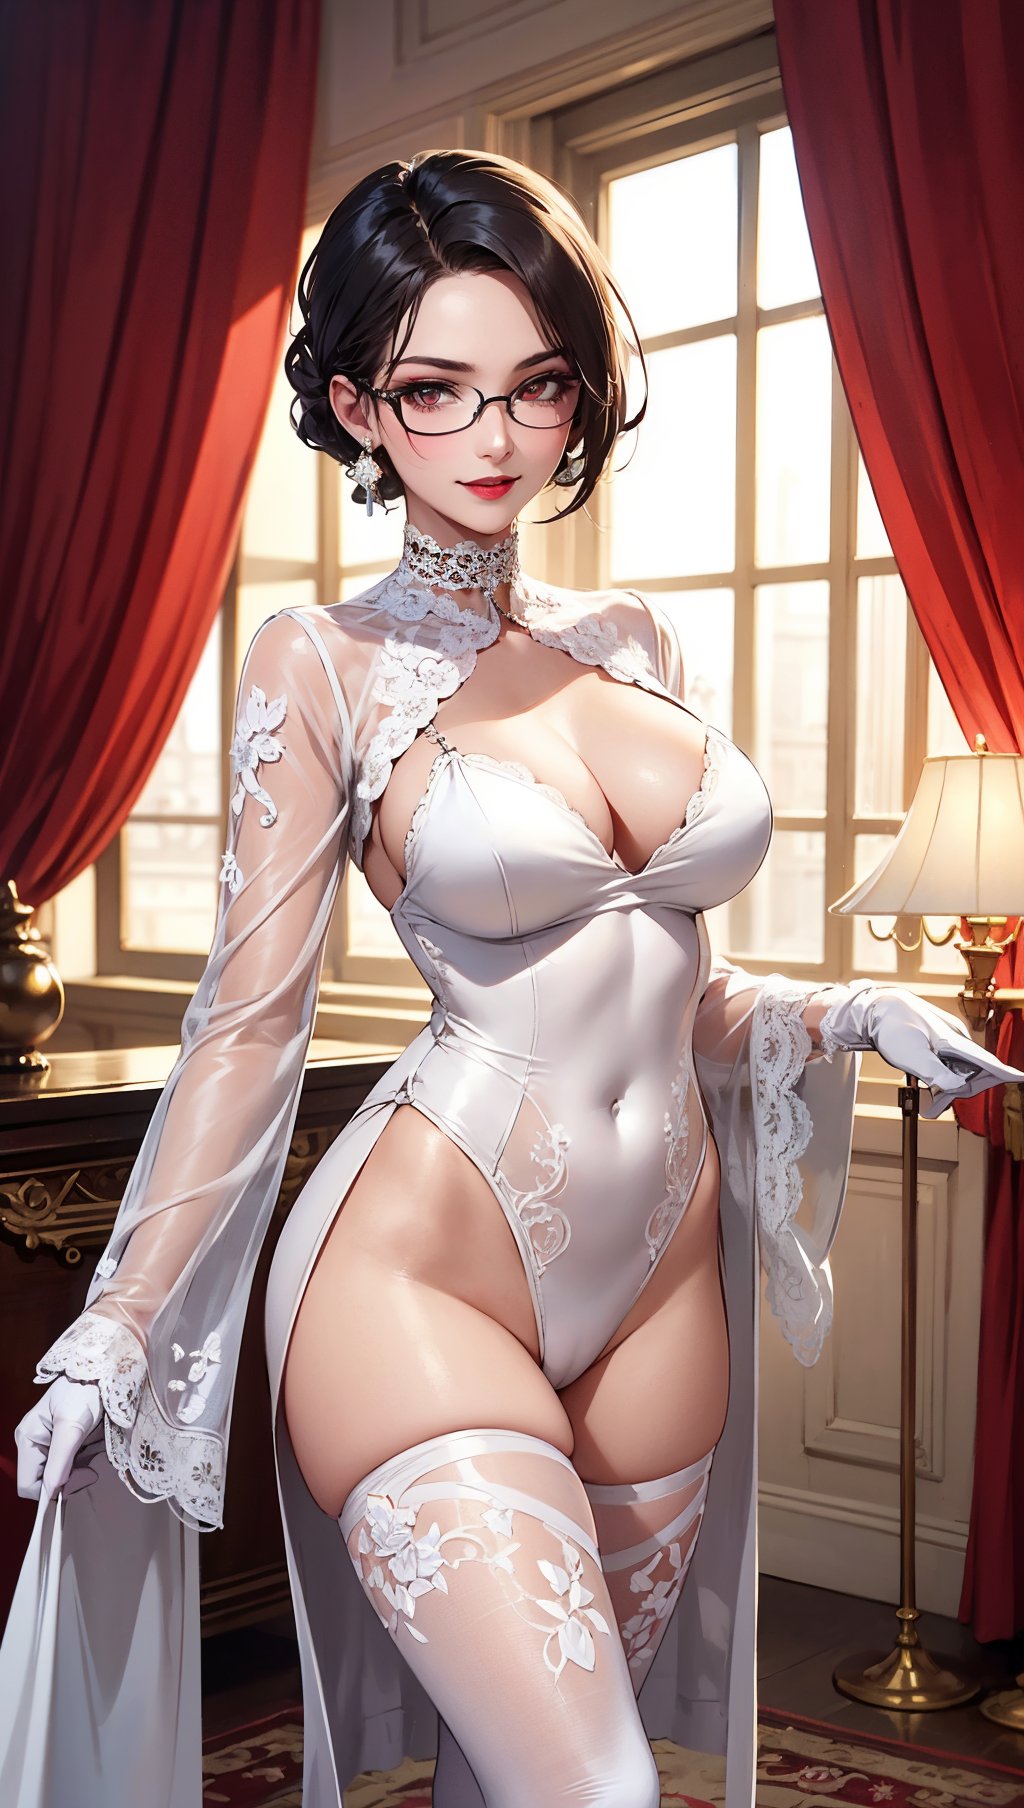 A photo of a young woman. (looking at the viewer). (short messy dark hair),(slender),(dark lips),flirting with the camera. (white sclera),(square glasses),(dark makeup),(white choker),(jewelry),(smiling),(dyed hair, hair color),(white intricate foliage filigree embroidered),(sleeved) plunging lace sheer v-neck (catsuit),(unitard),(long gloves, bolero),(well lit, warm natural light),ornate lavish rich aristocrat royal mansion,music room,art,drapes,curtains,carpets,rugs,doors,(chaise lounge) (confident, seductive, dominant, intimidating),